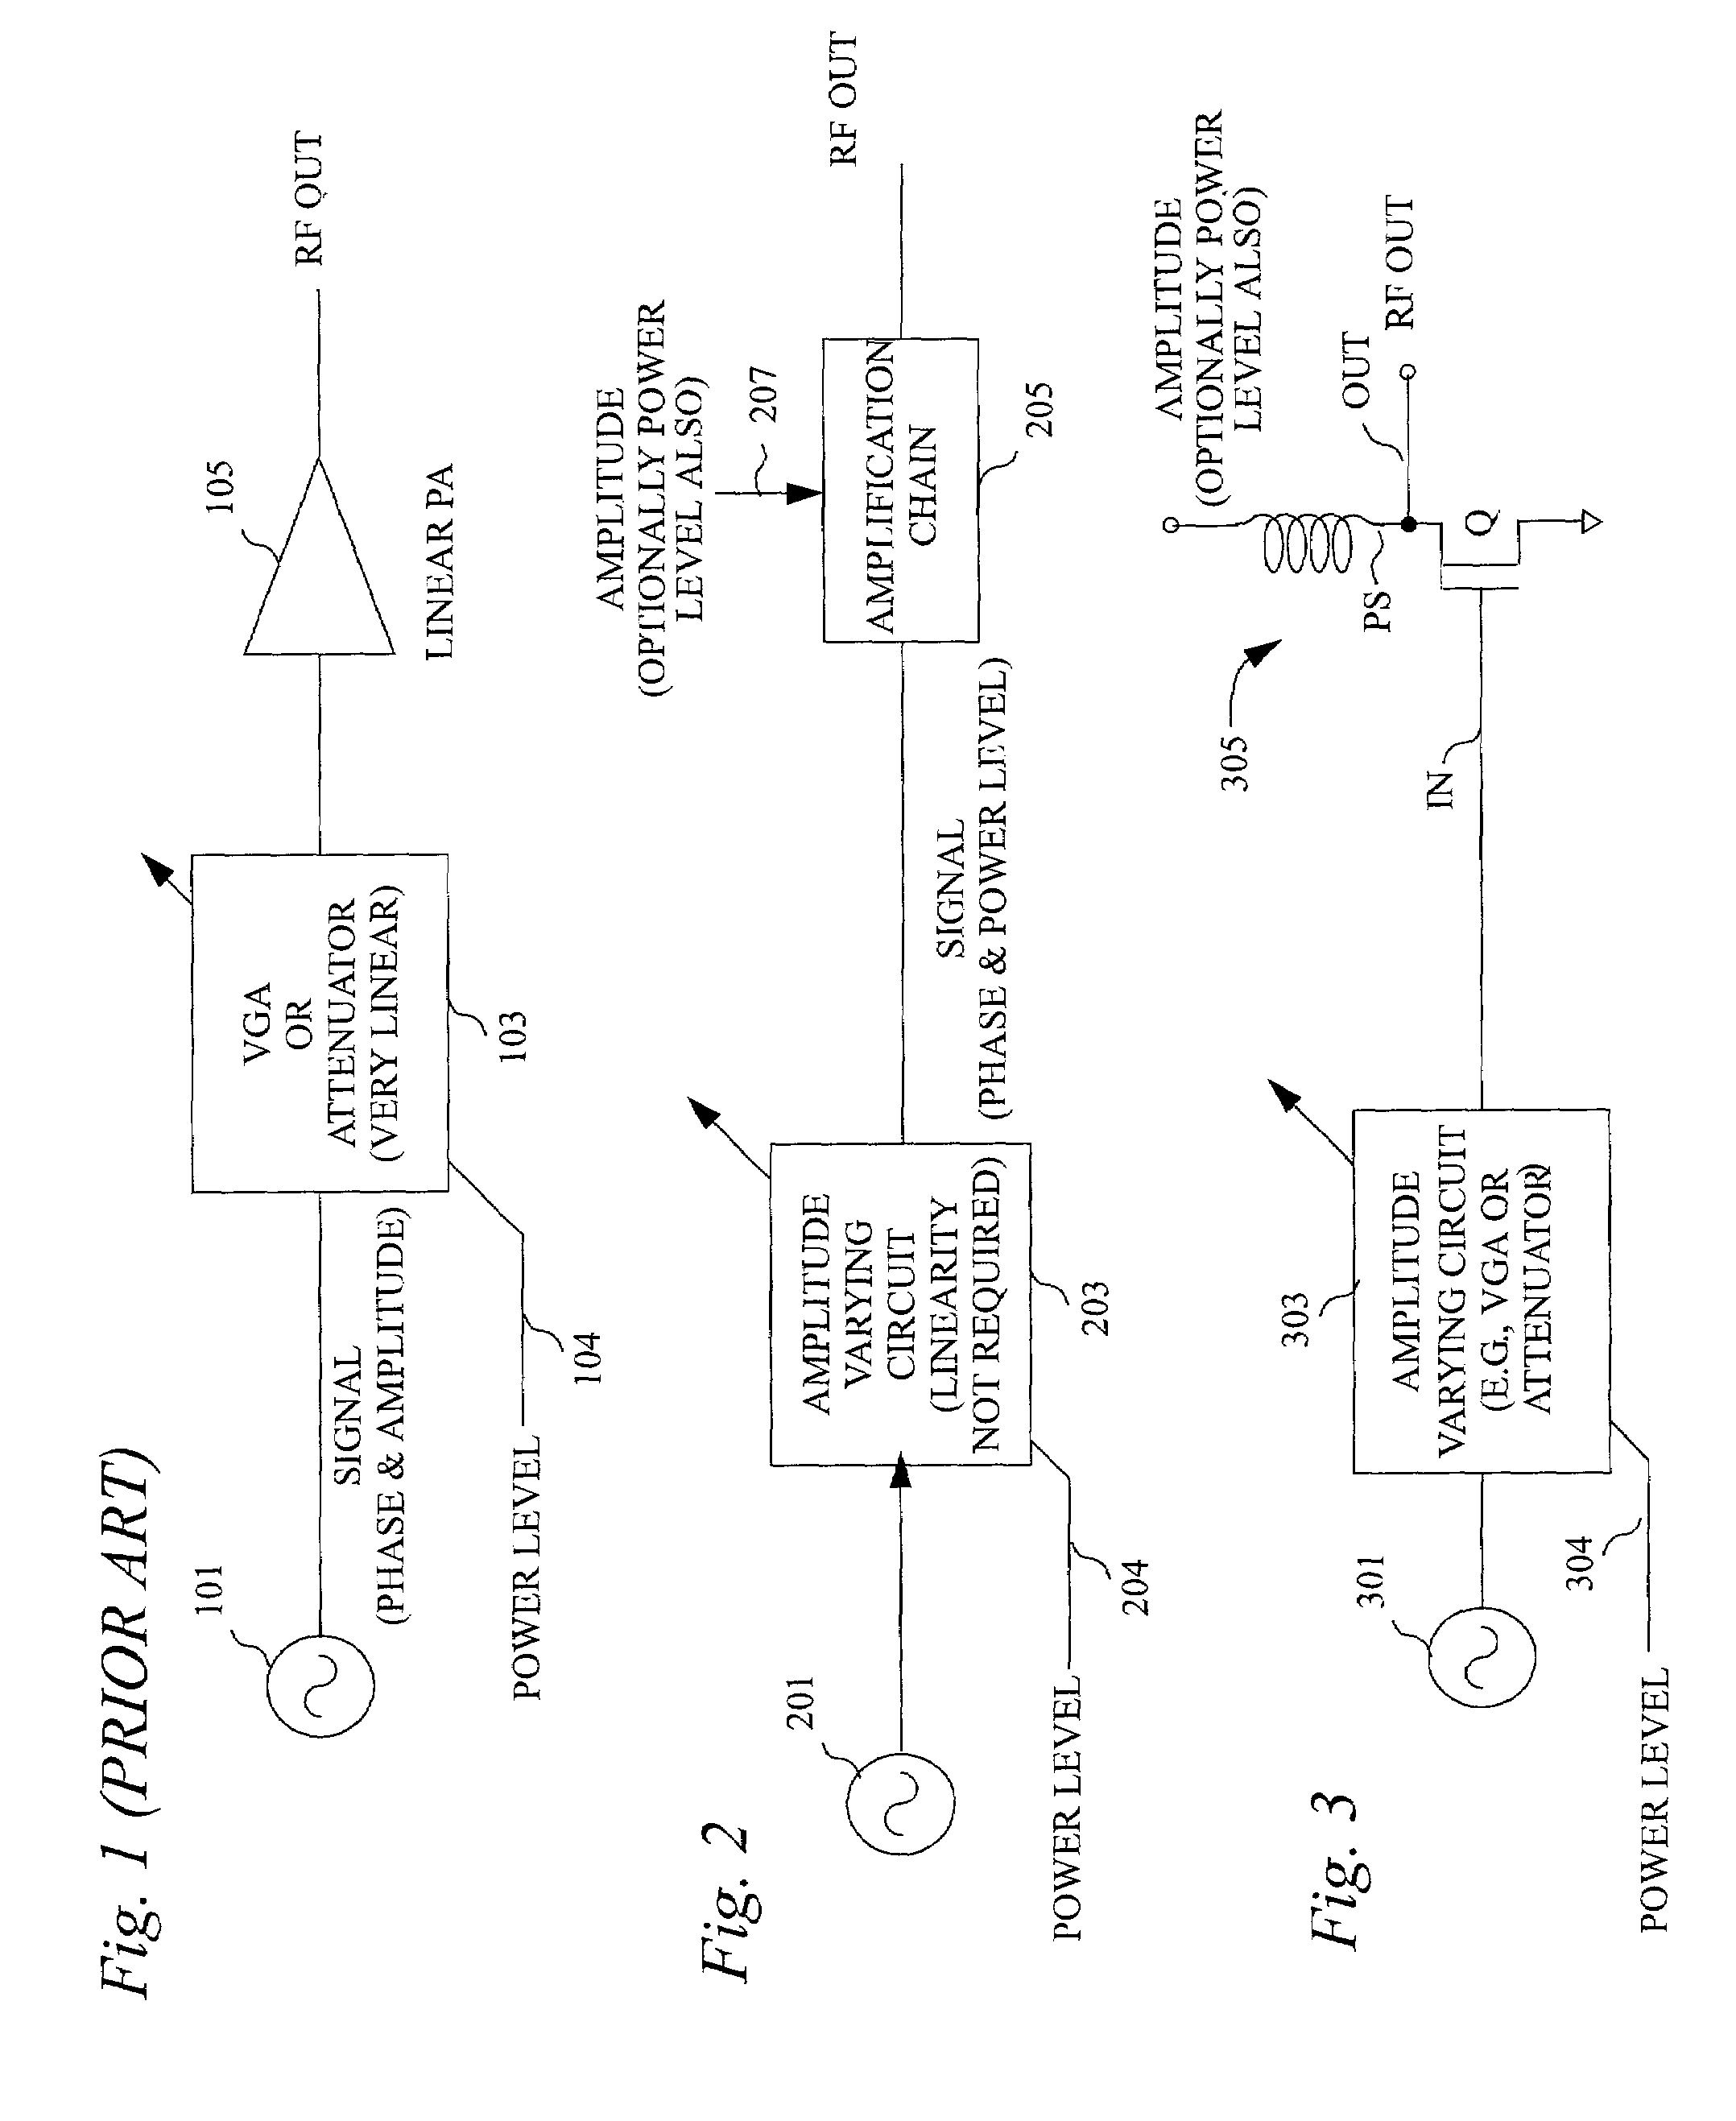 Communications signal amplifiers having independent power control and amplitude modulation